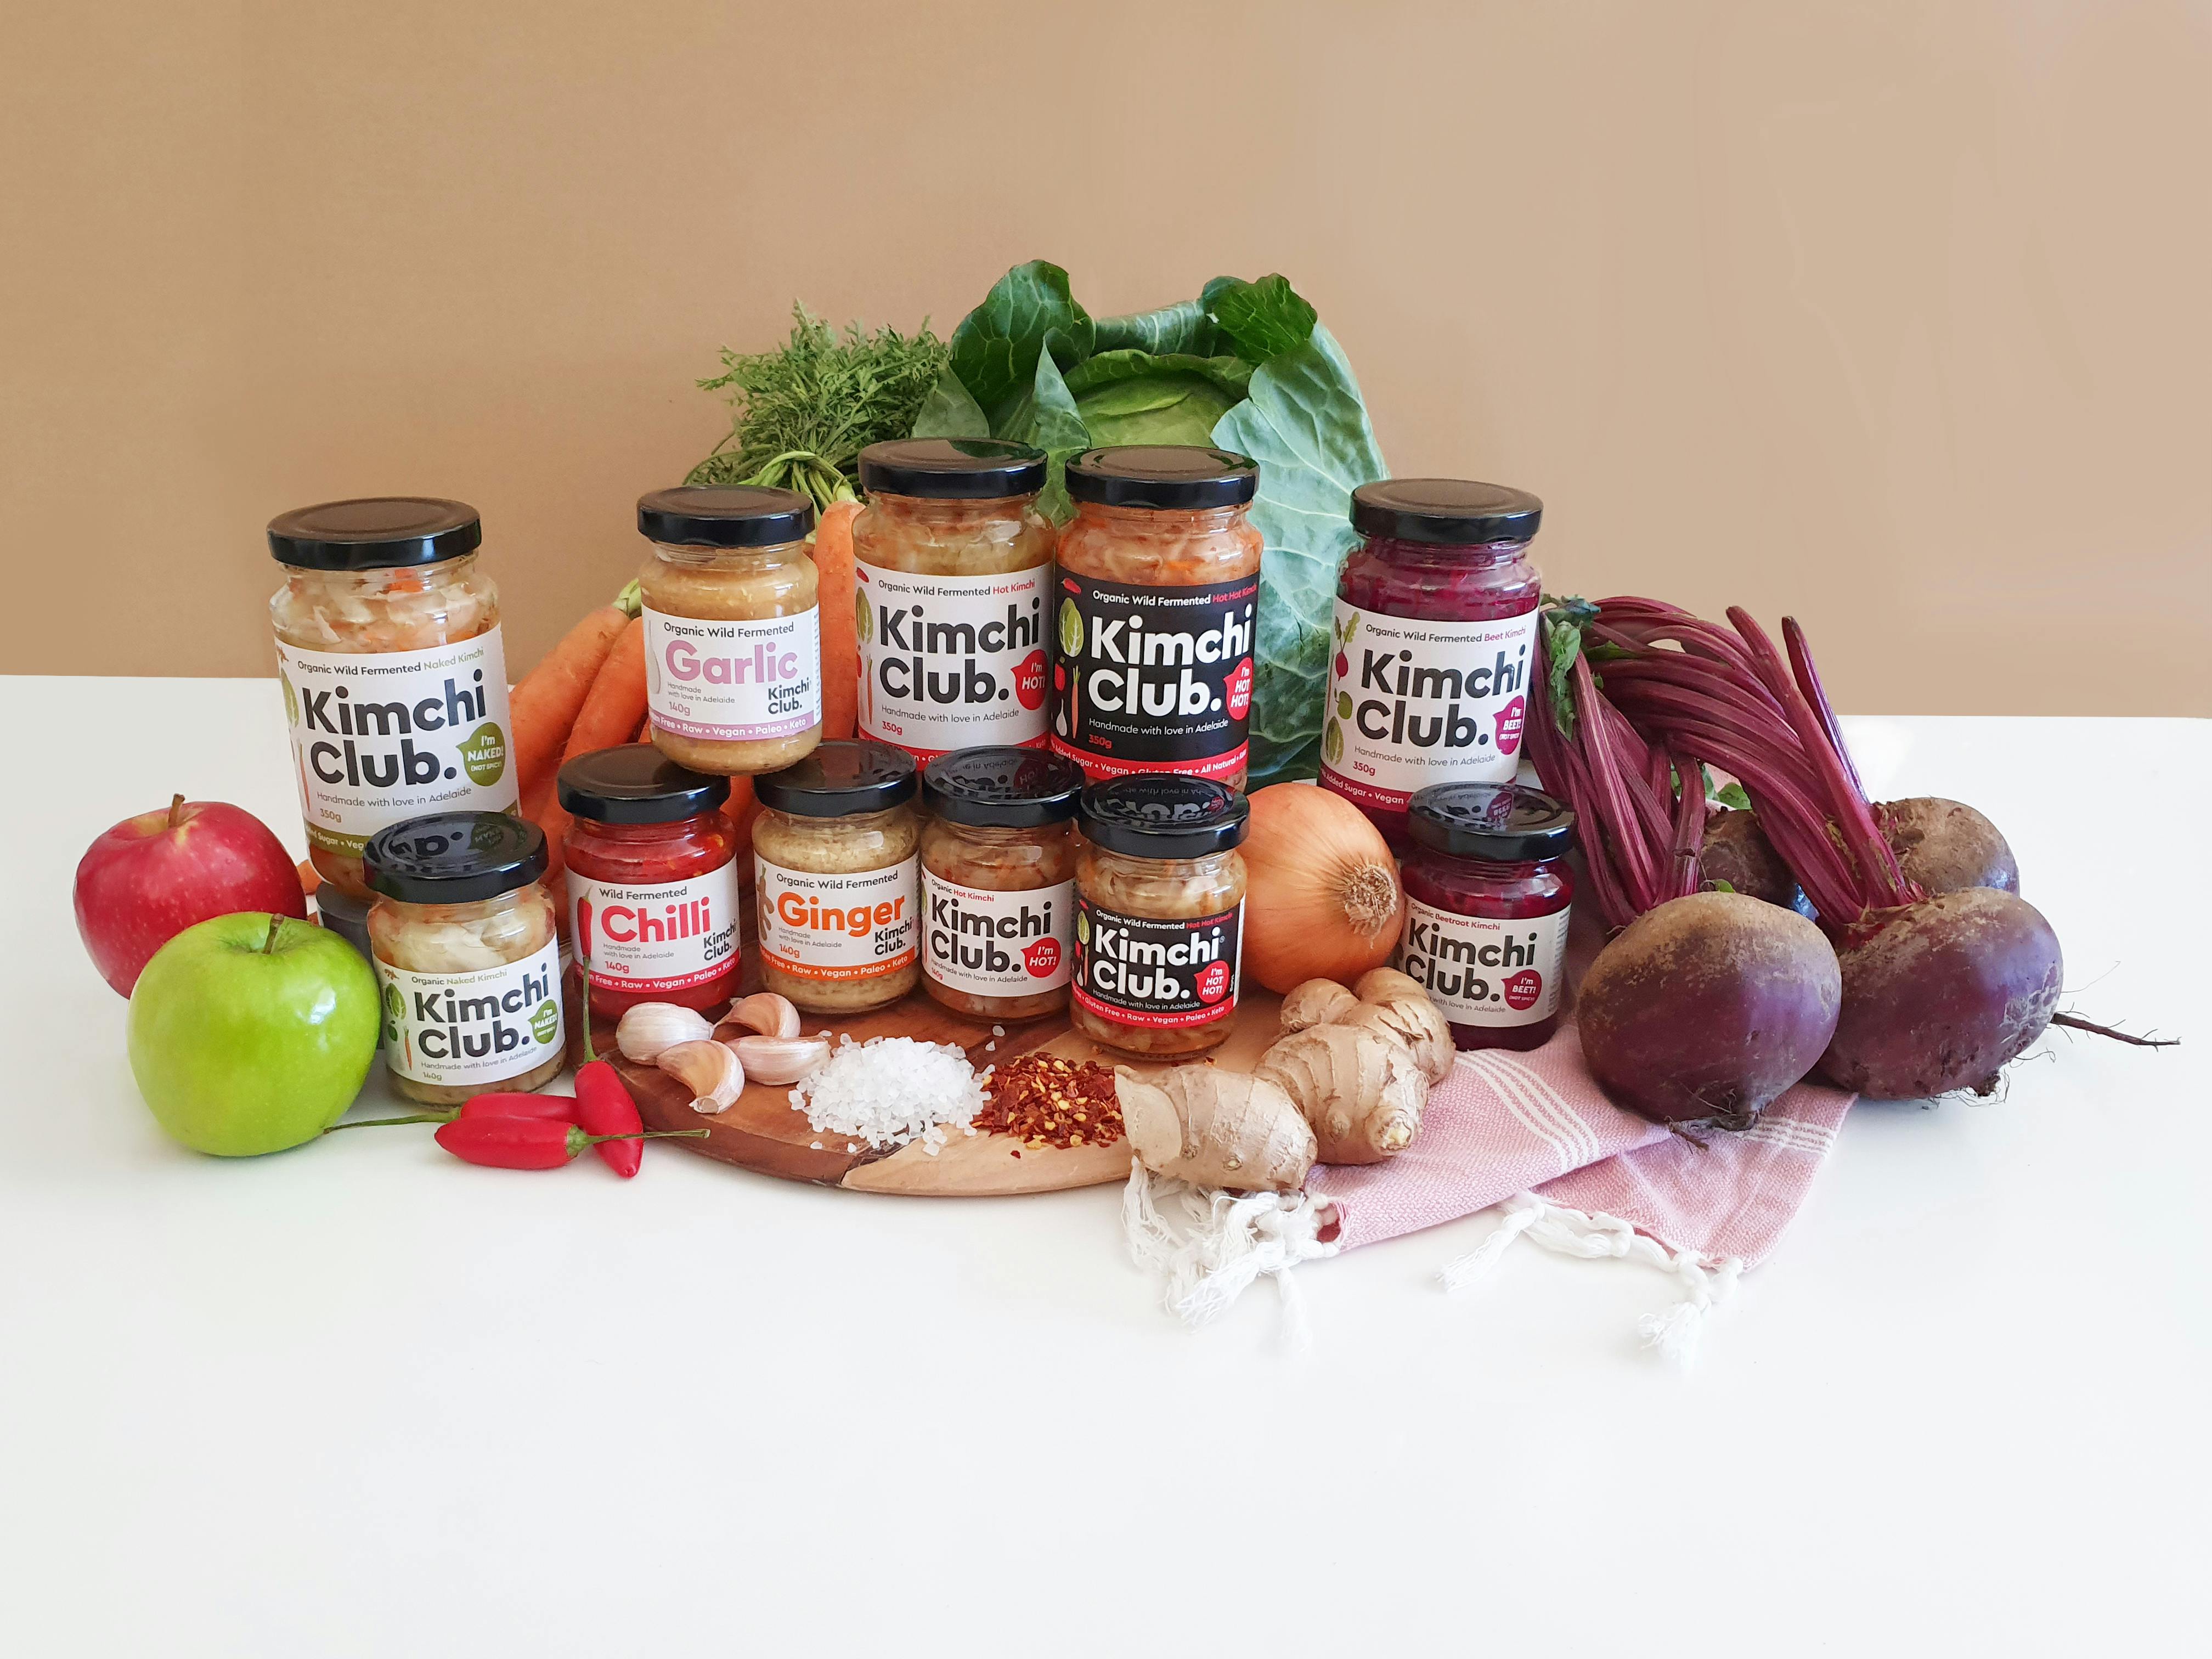 A range display of Kimchi Club products in jars